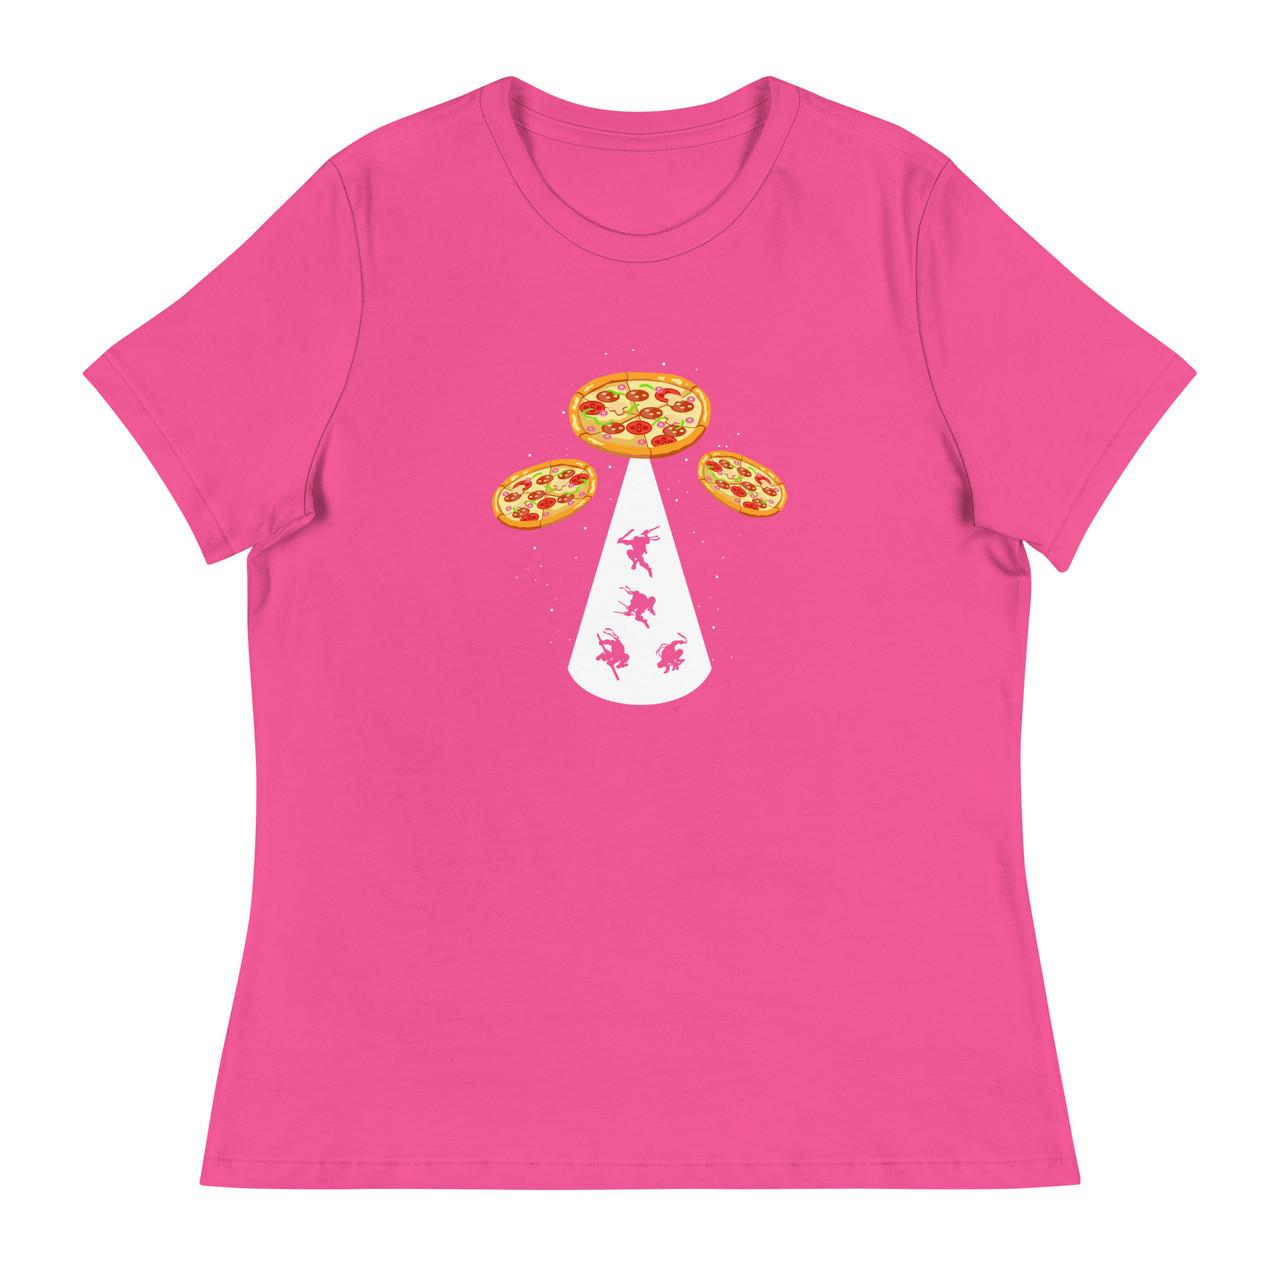 Pizza UFO Women's Relaxed T-Shirt - Bella + Canvas 6400 